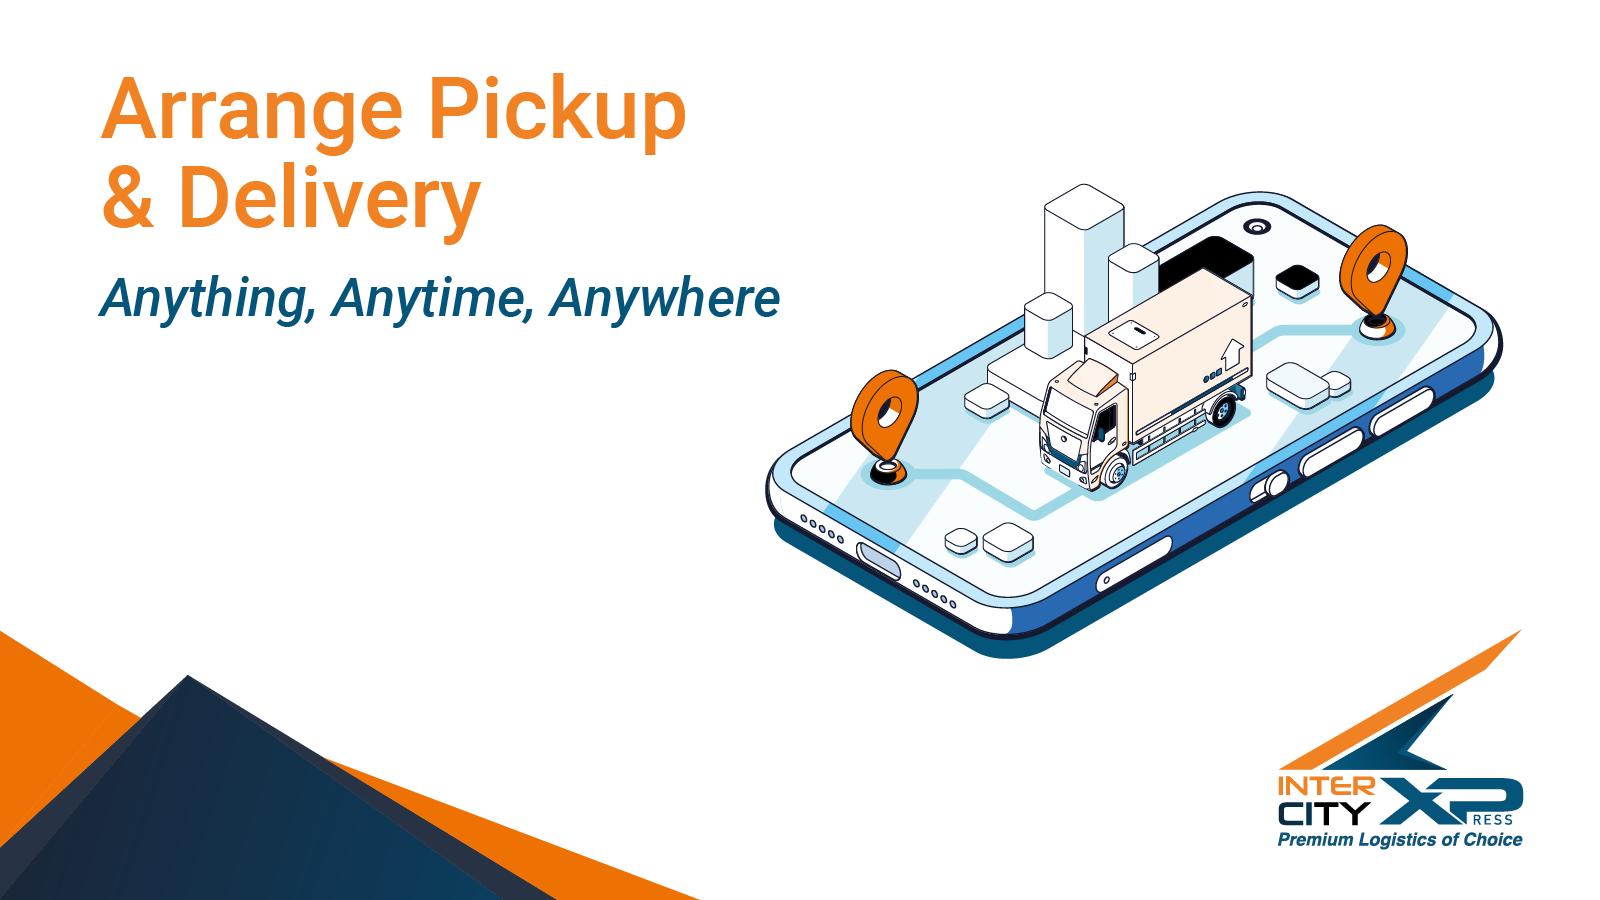 InterCityXpress one step solution for pickup and delivery